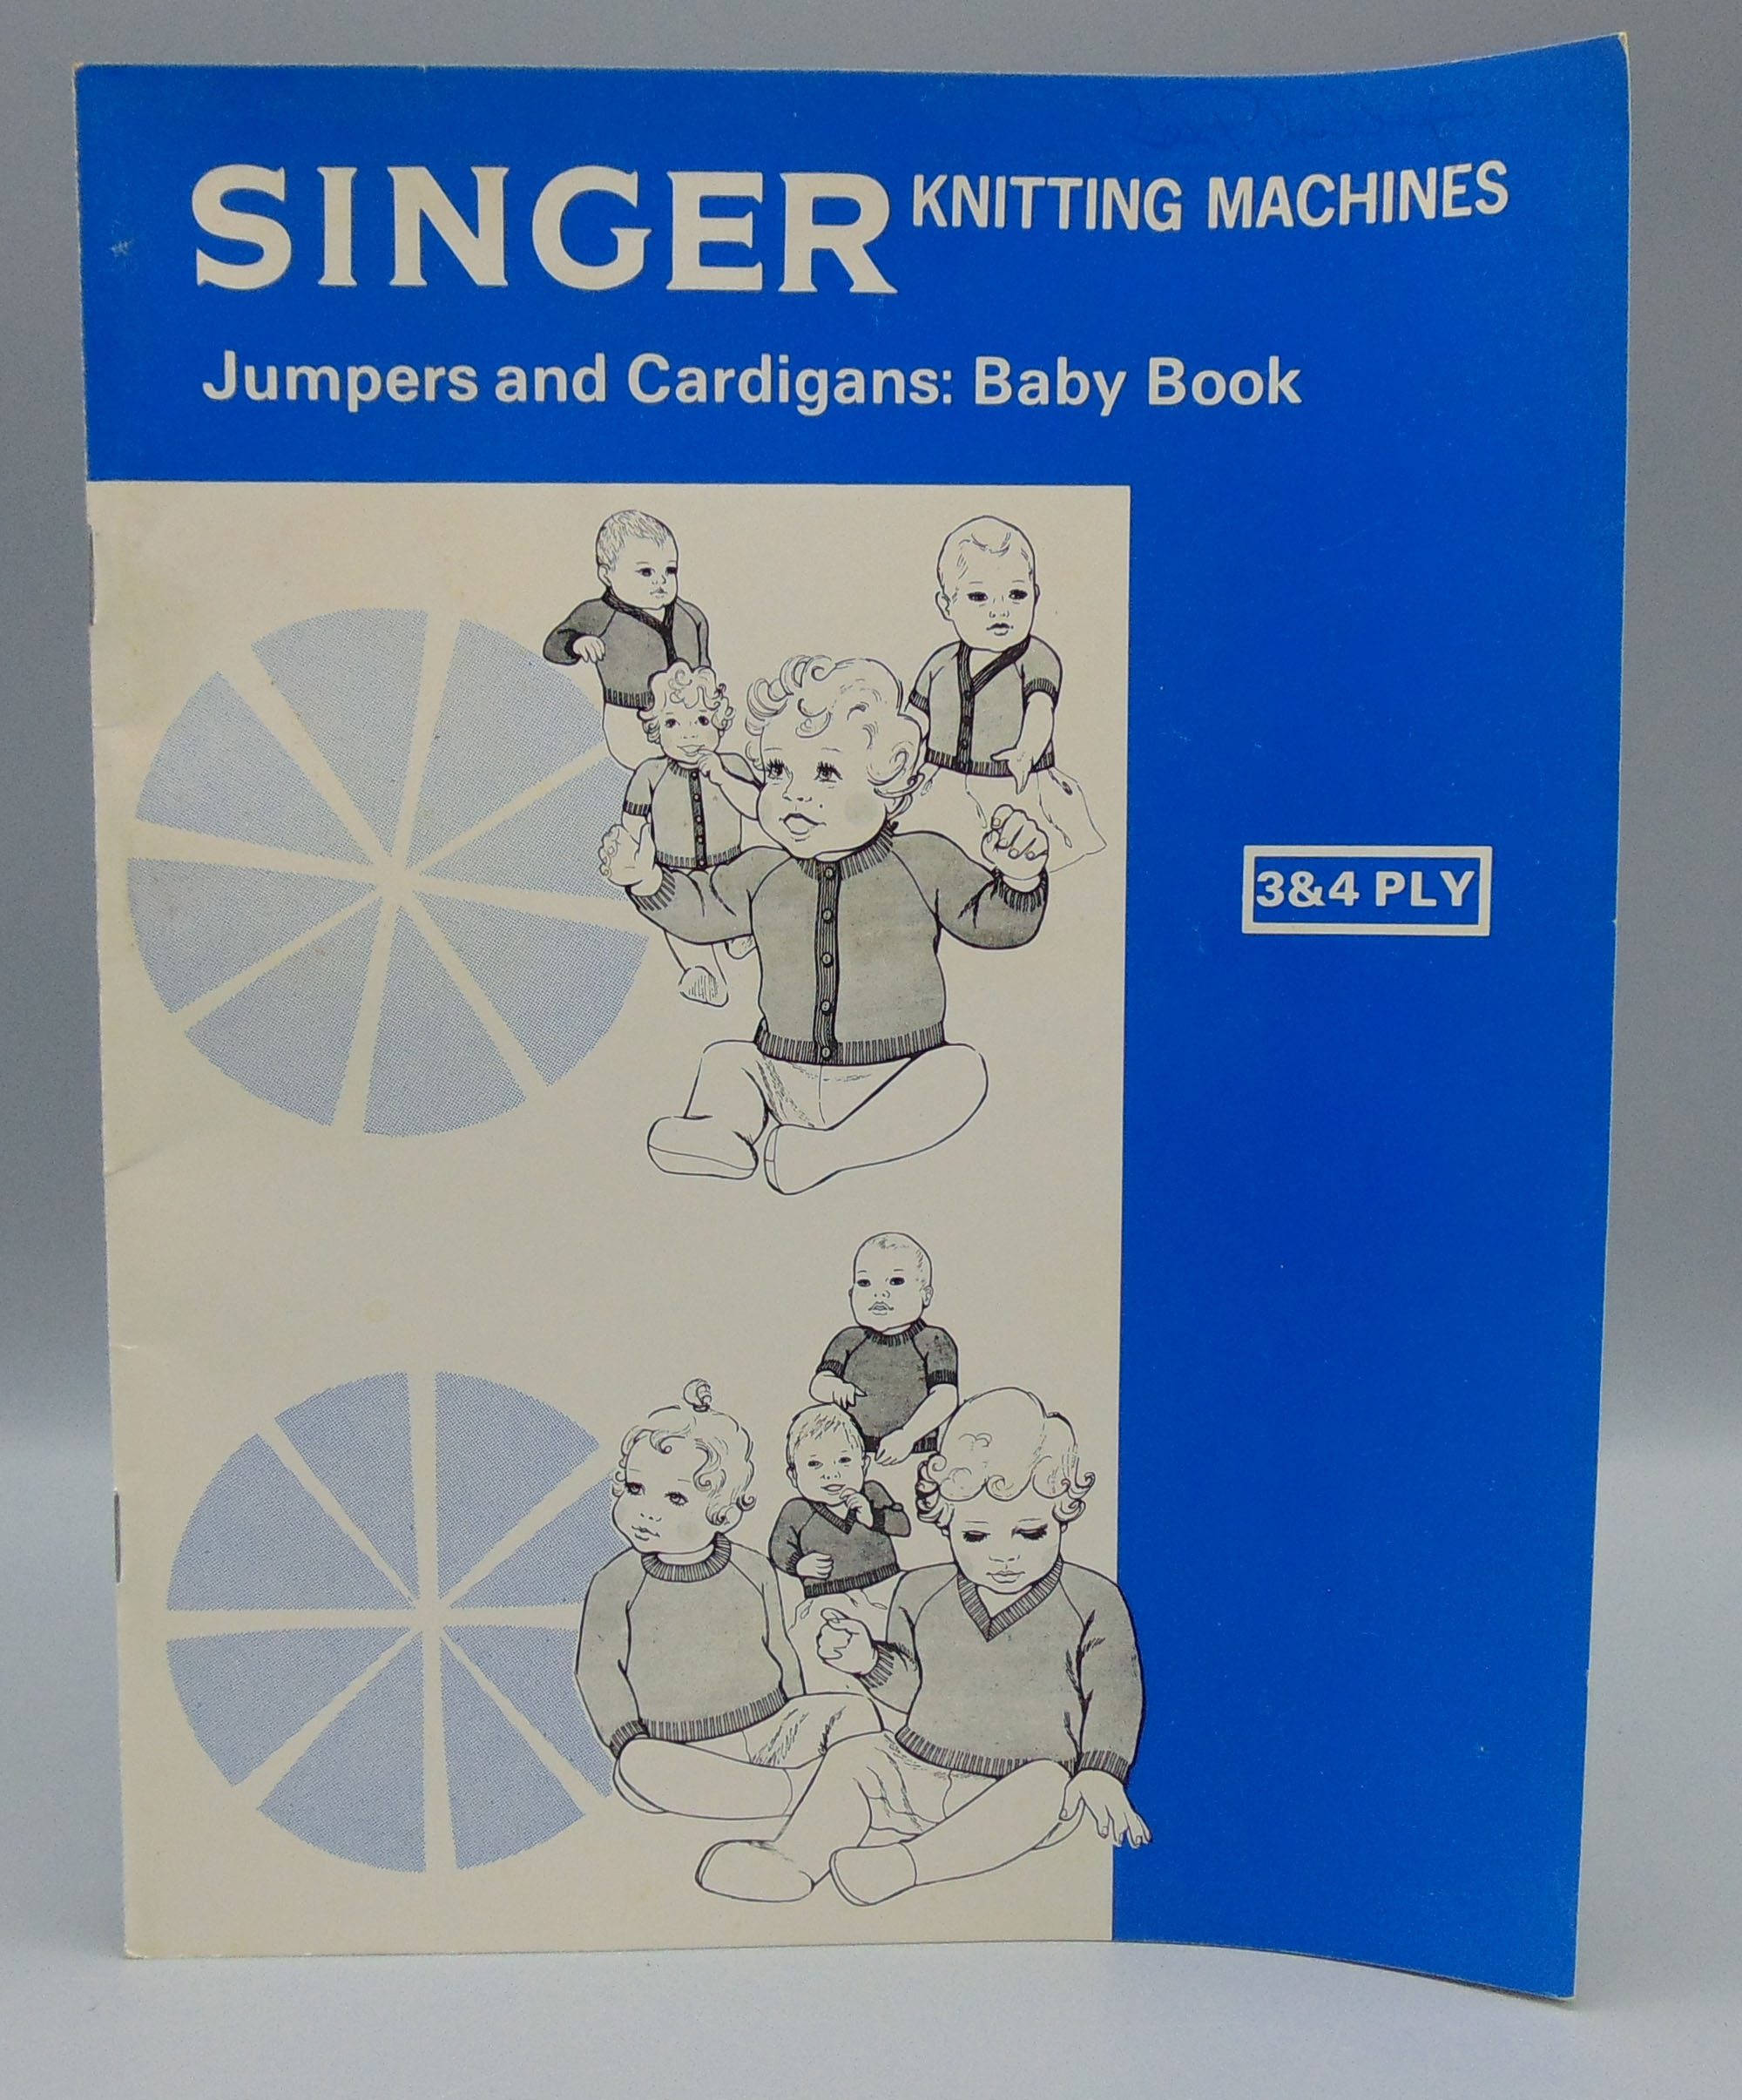 Singer Knitting Machines Jumpers and Cardigans: Baby Book 3 & 4 Ply